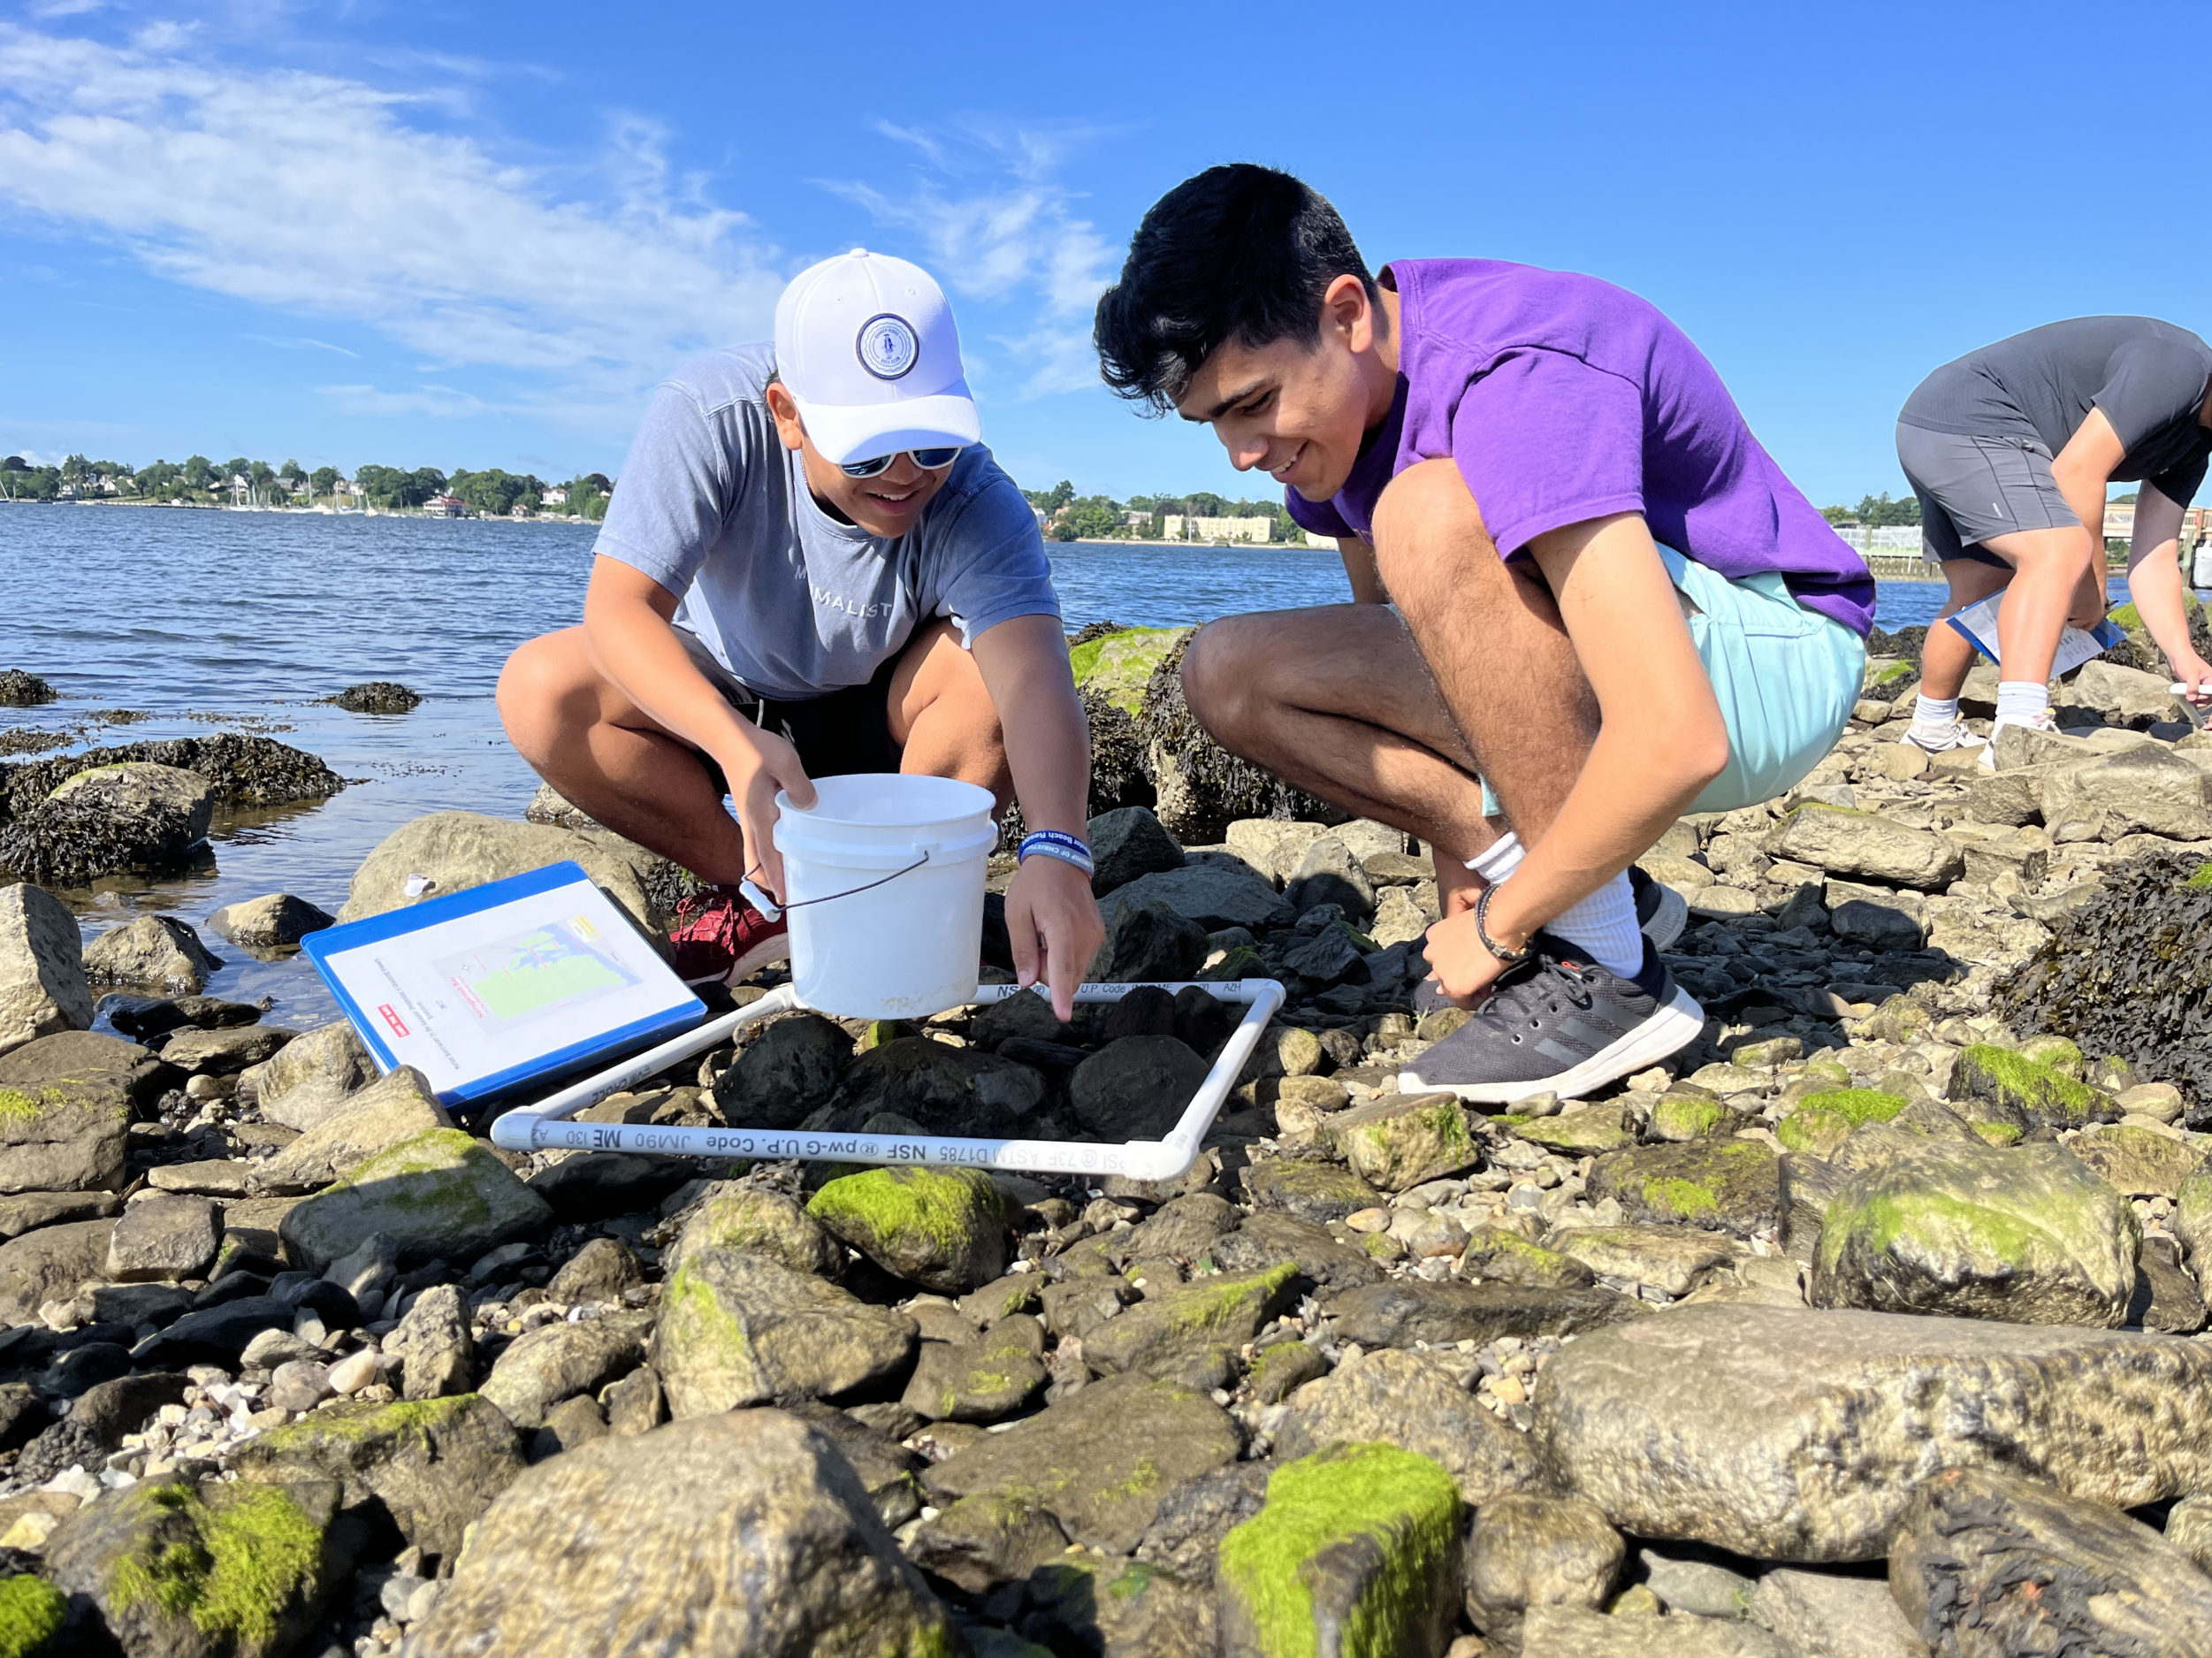 Two baycampers study items on Narragansett Bay's rocky shore